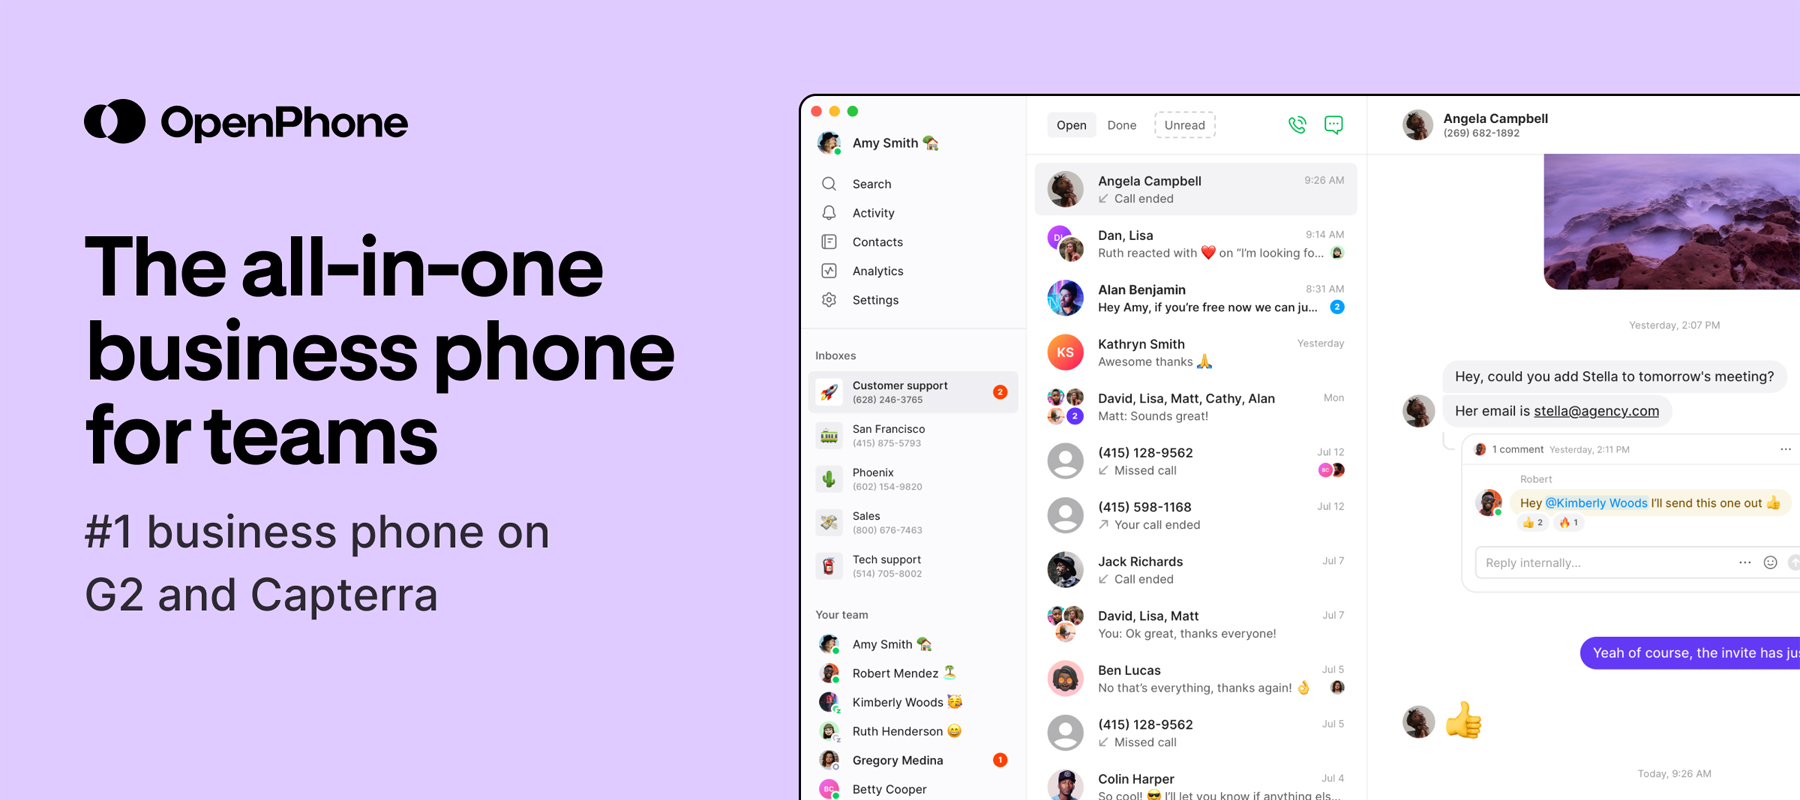 OpenPhone - The All in One Phone System for Business Teams